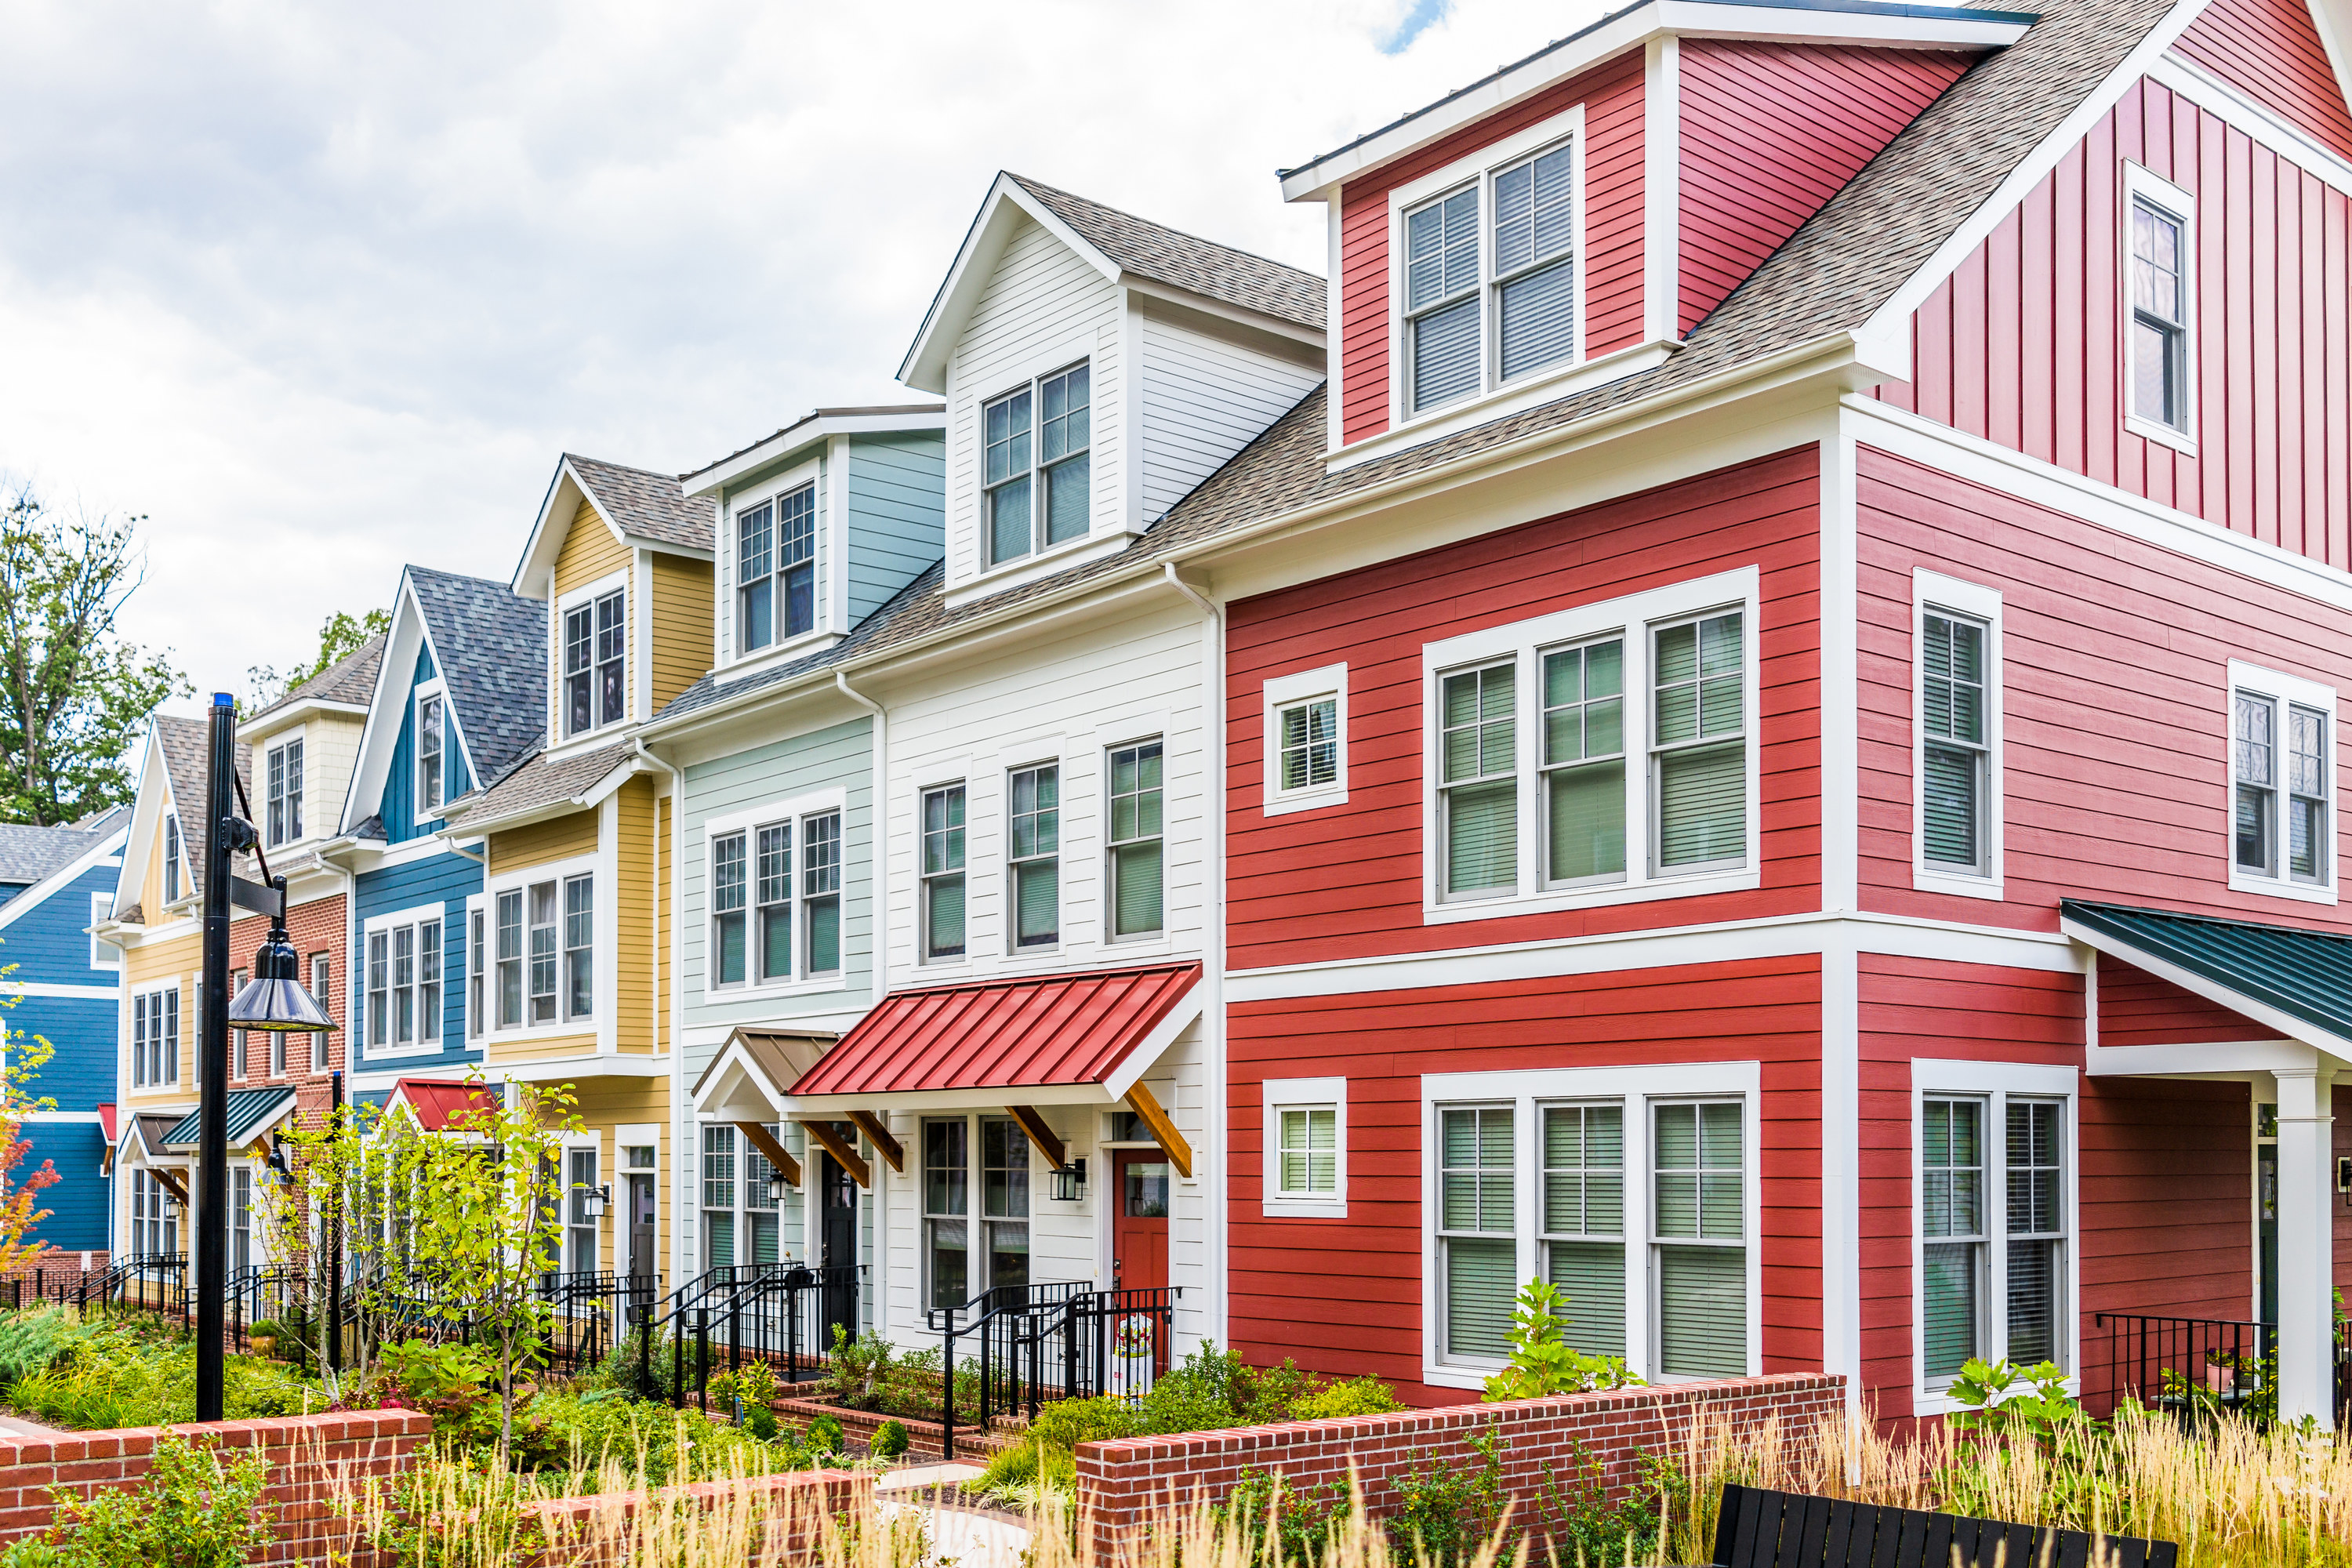 Row of colorful, red, yellow, blue, white, green painted residential townhouses, homes, houses with brick patio gardens in summer in Maryland